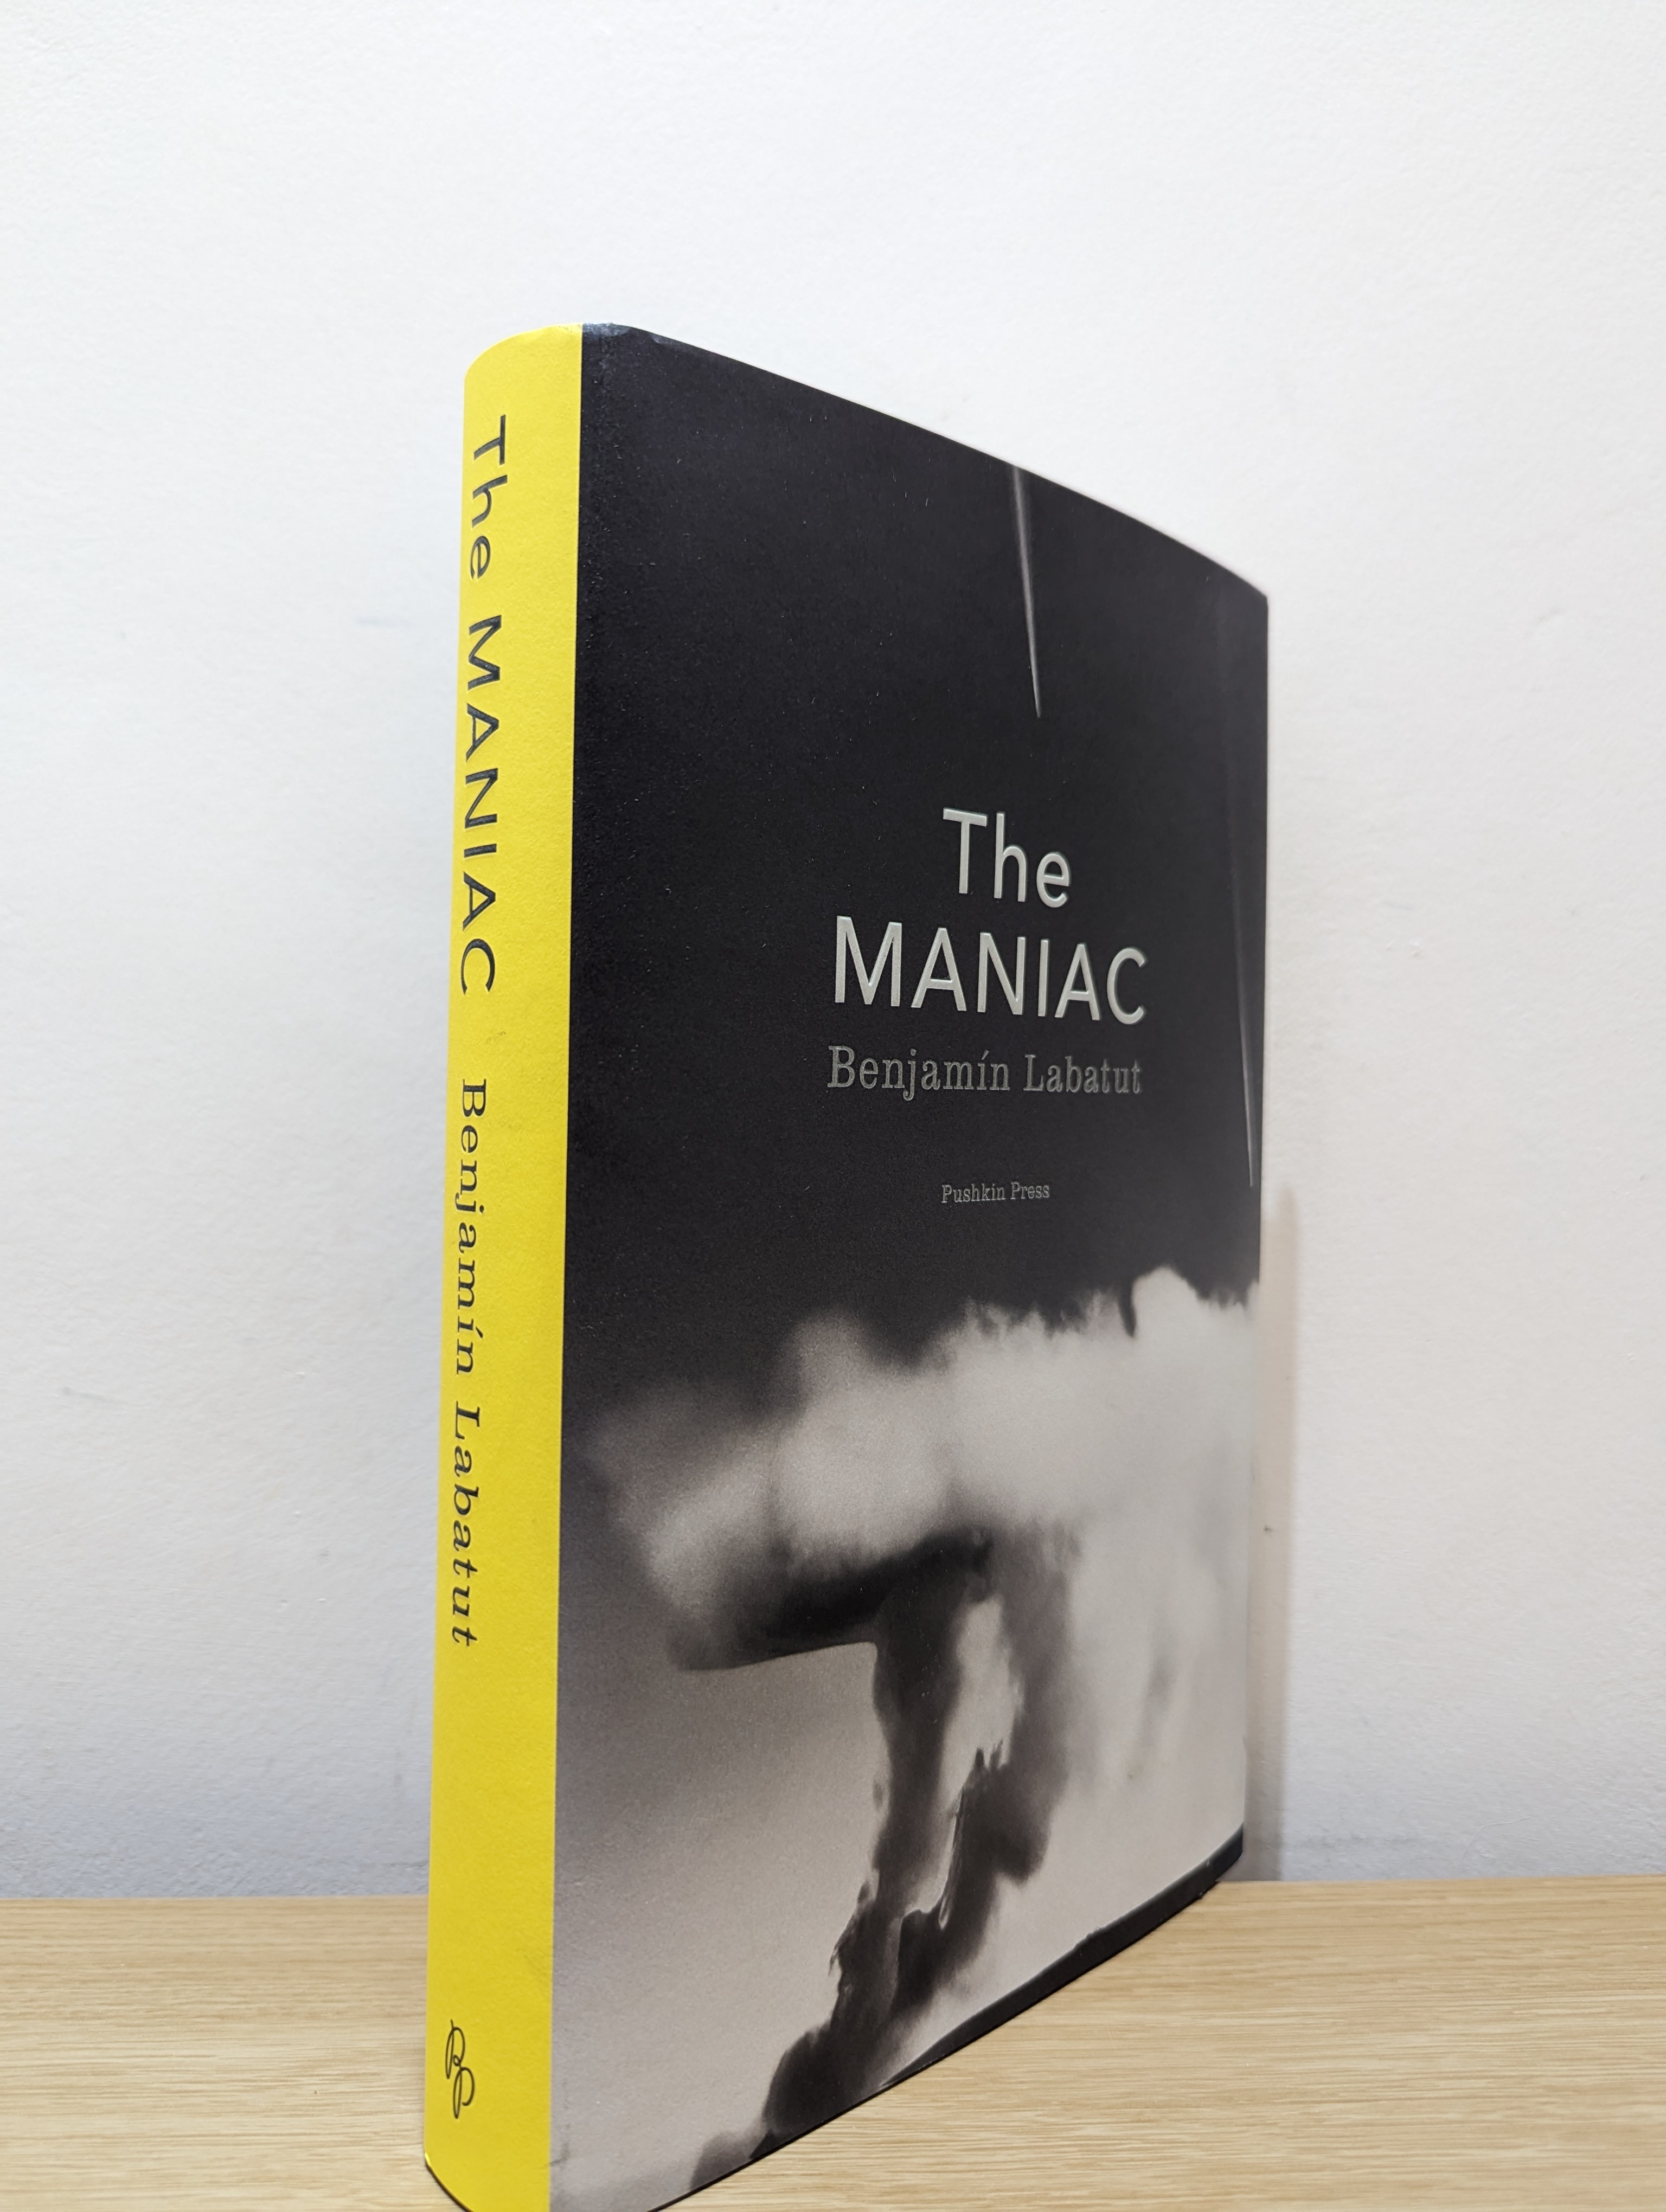 Book Review: 'The Maniac,' by Benjamín Labatut - The New York Times